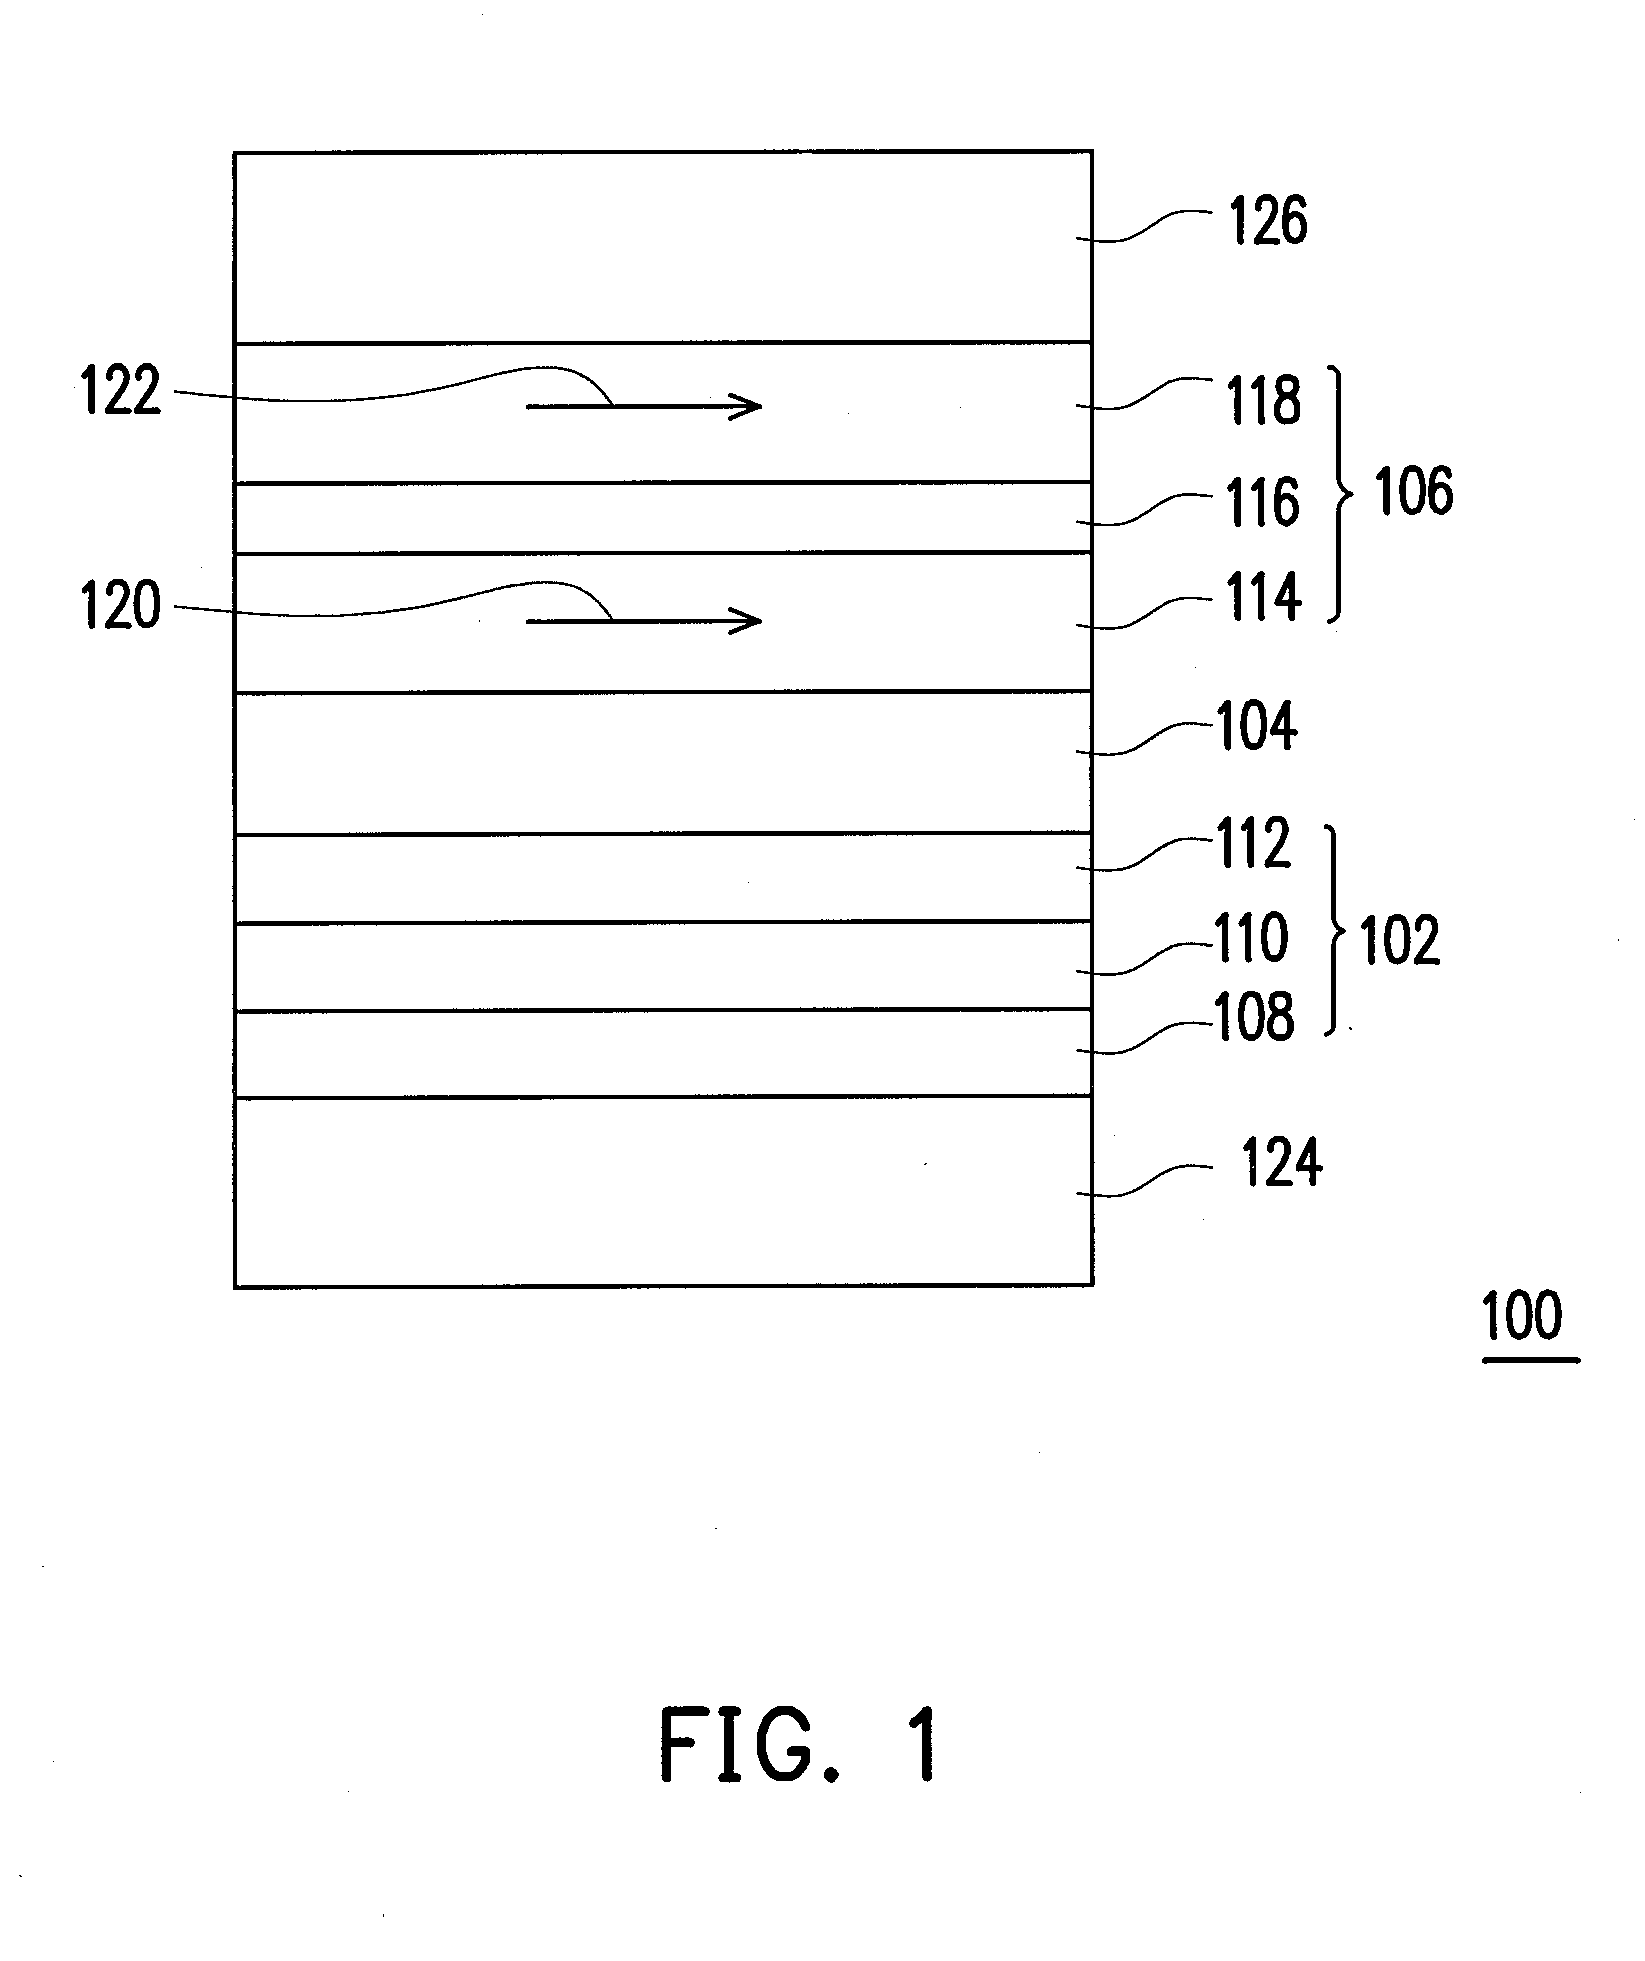 Magnetic memory element utilizing spin transfer switching